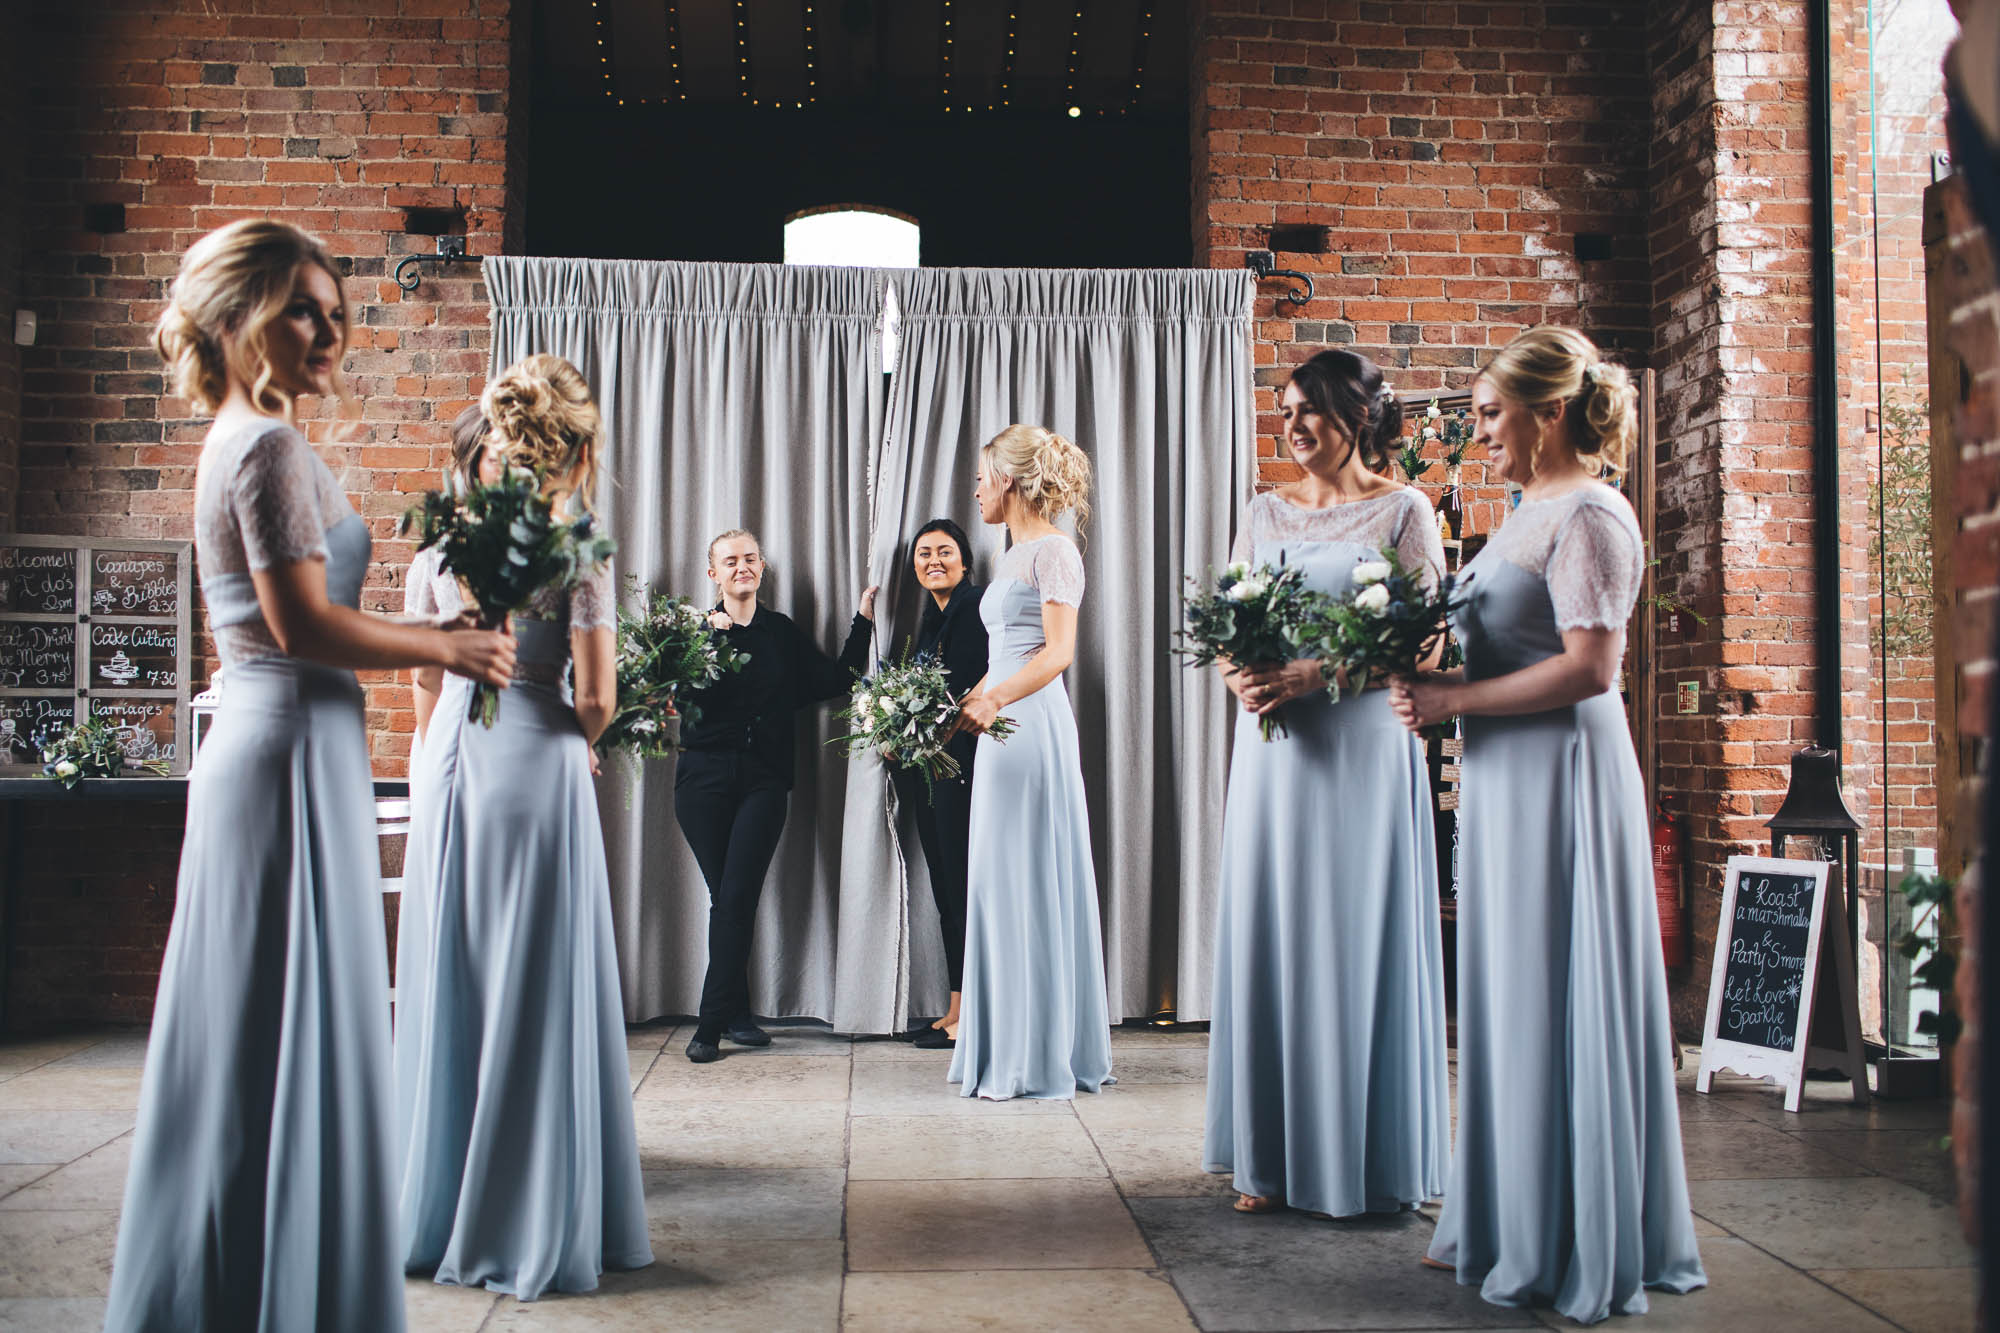 Bridal party talk with staff members as they wait for Bride to arrive